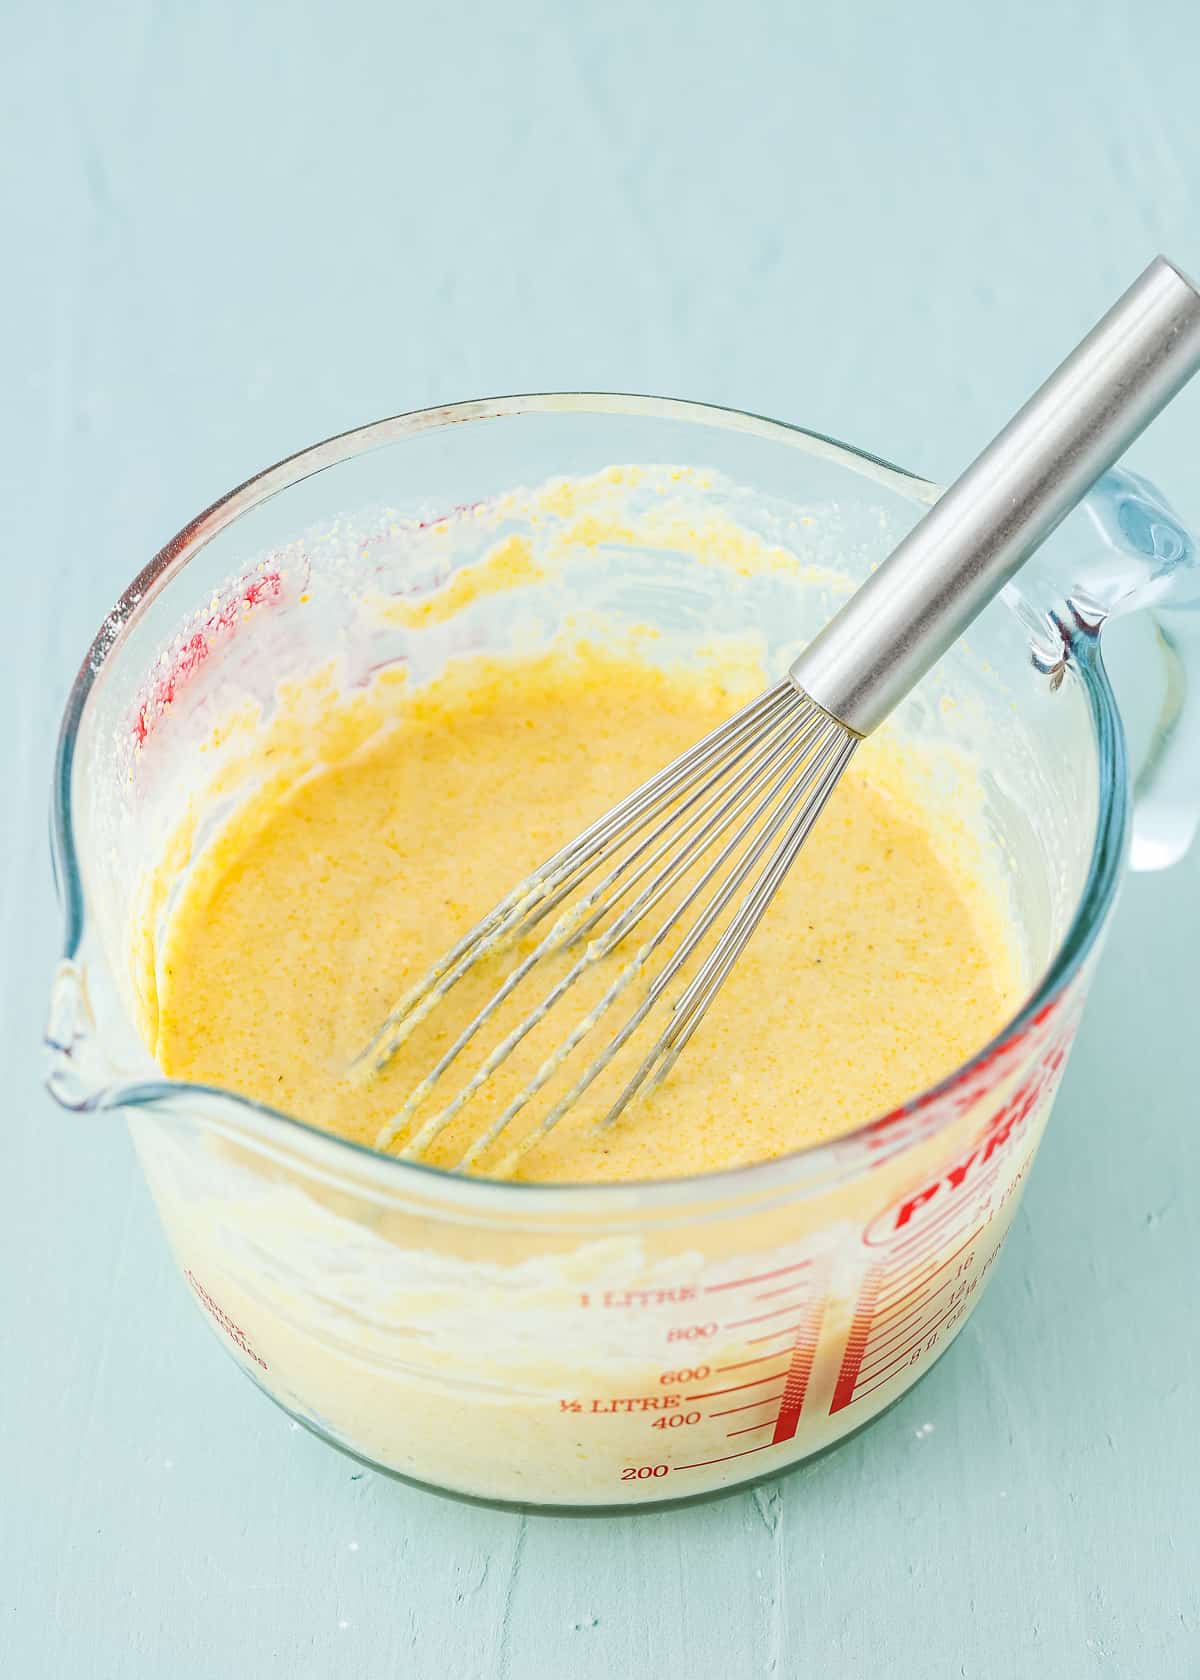 corndog batter in a glass measuring cup.